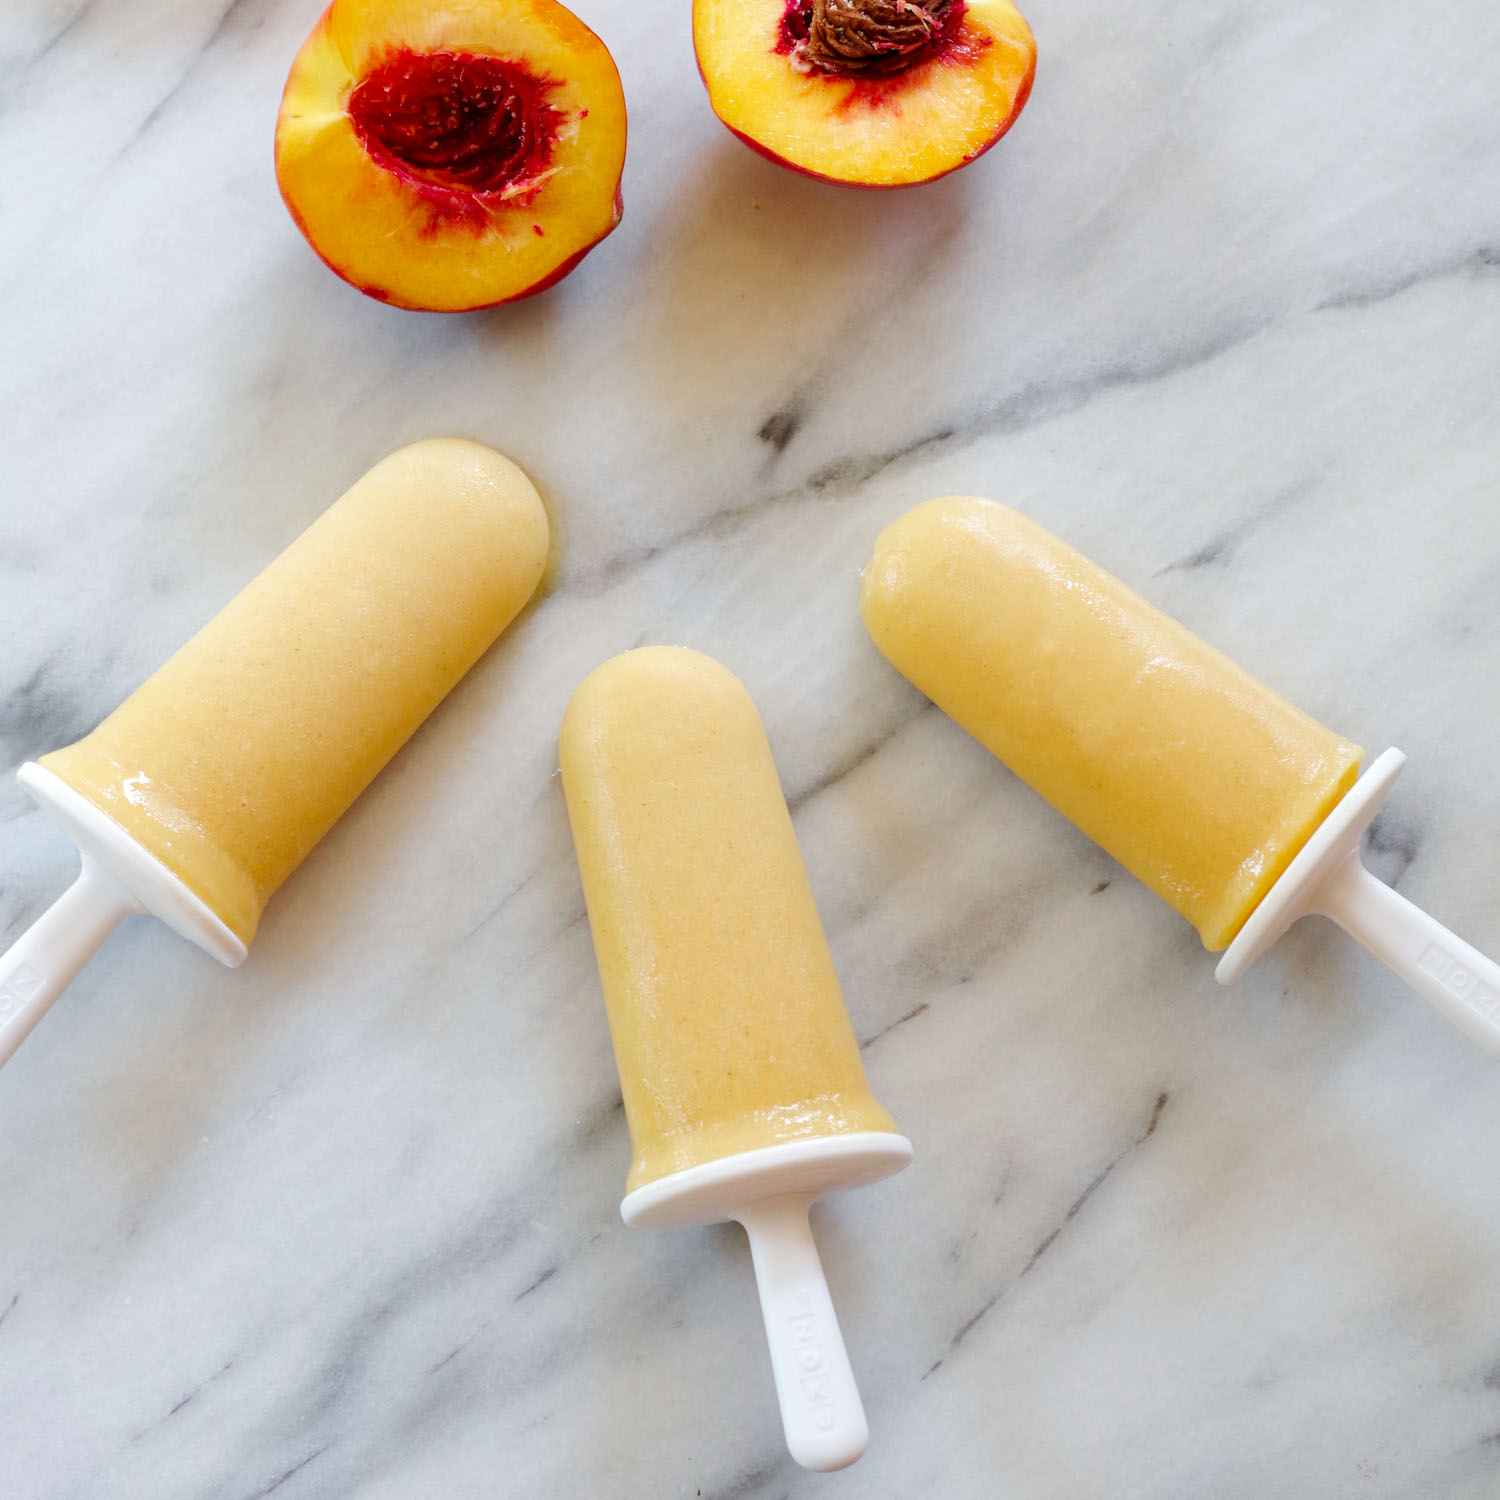 Coconut Peach Popsicles from Frugal Vegan